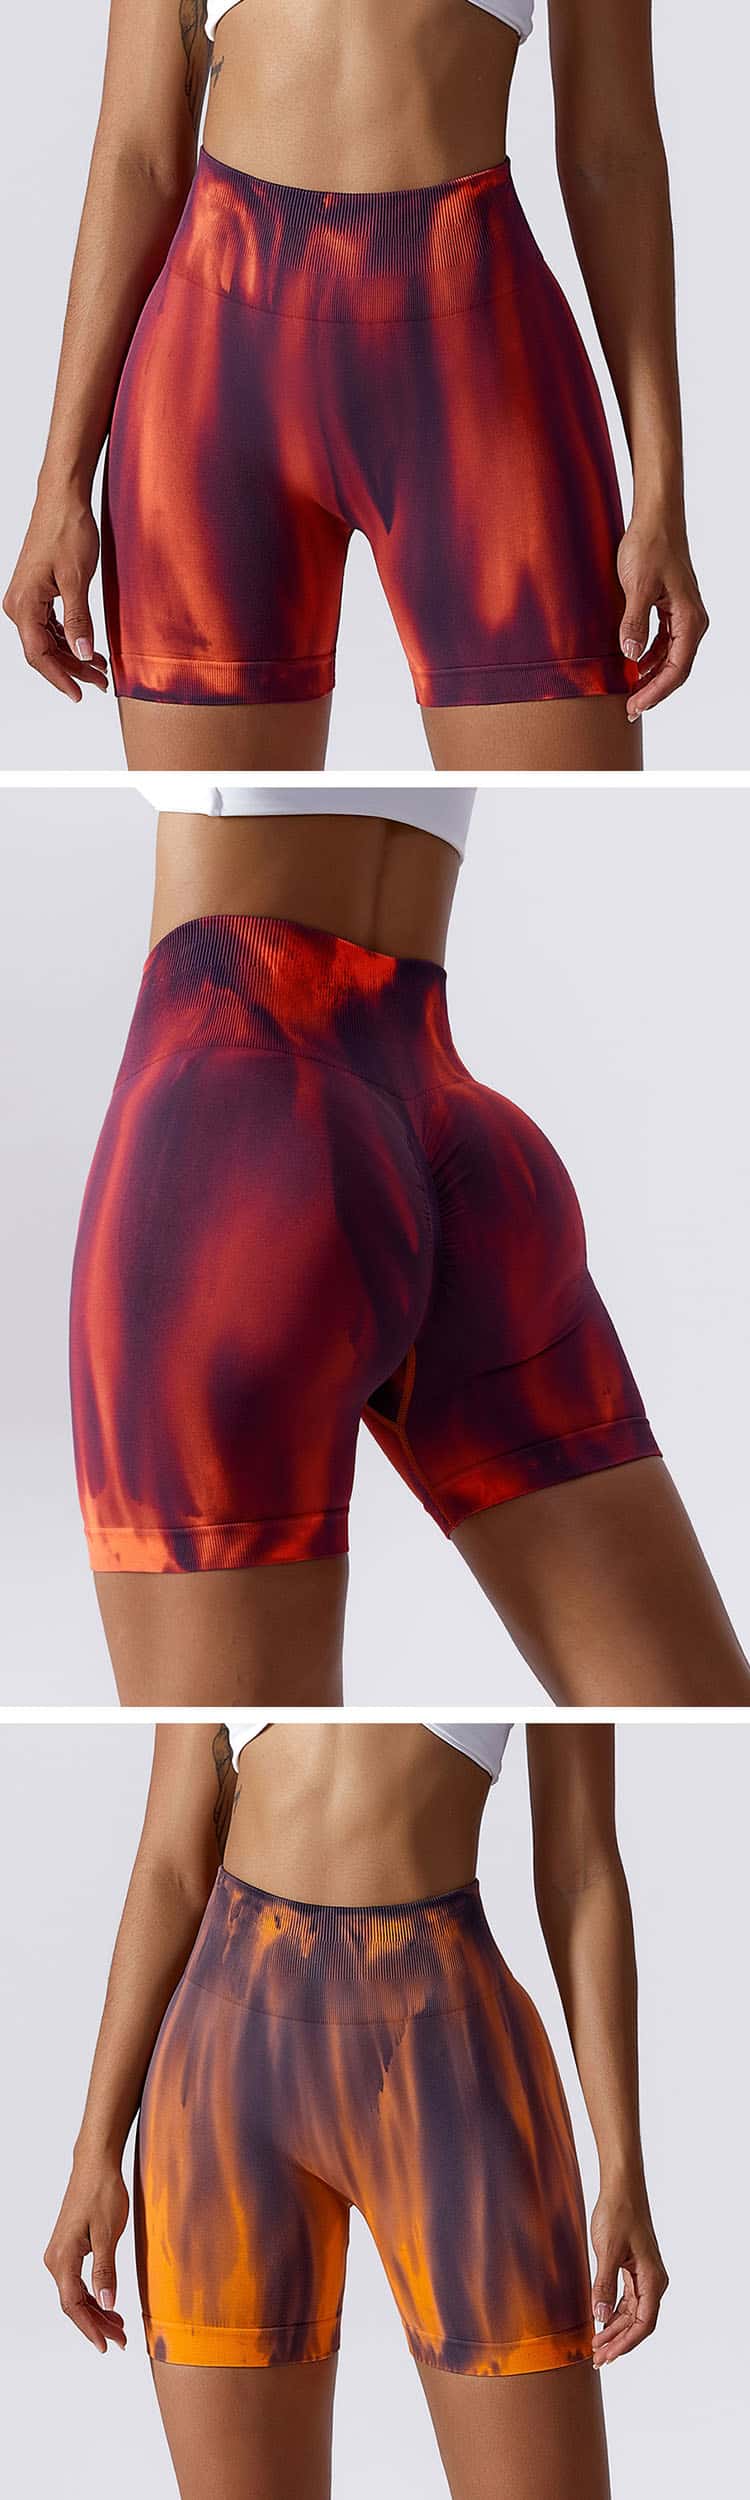 Adopt hip line design, show your hips and show your sexy figure